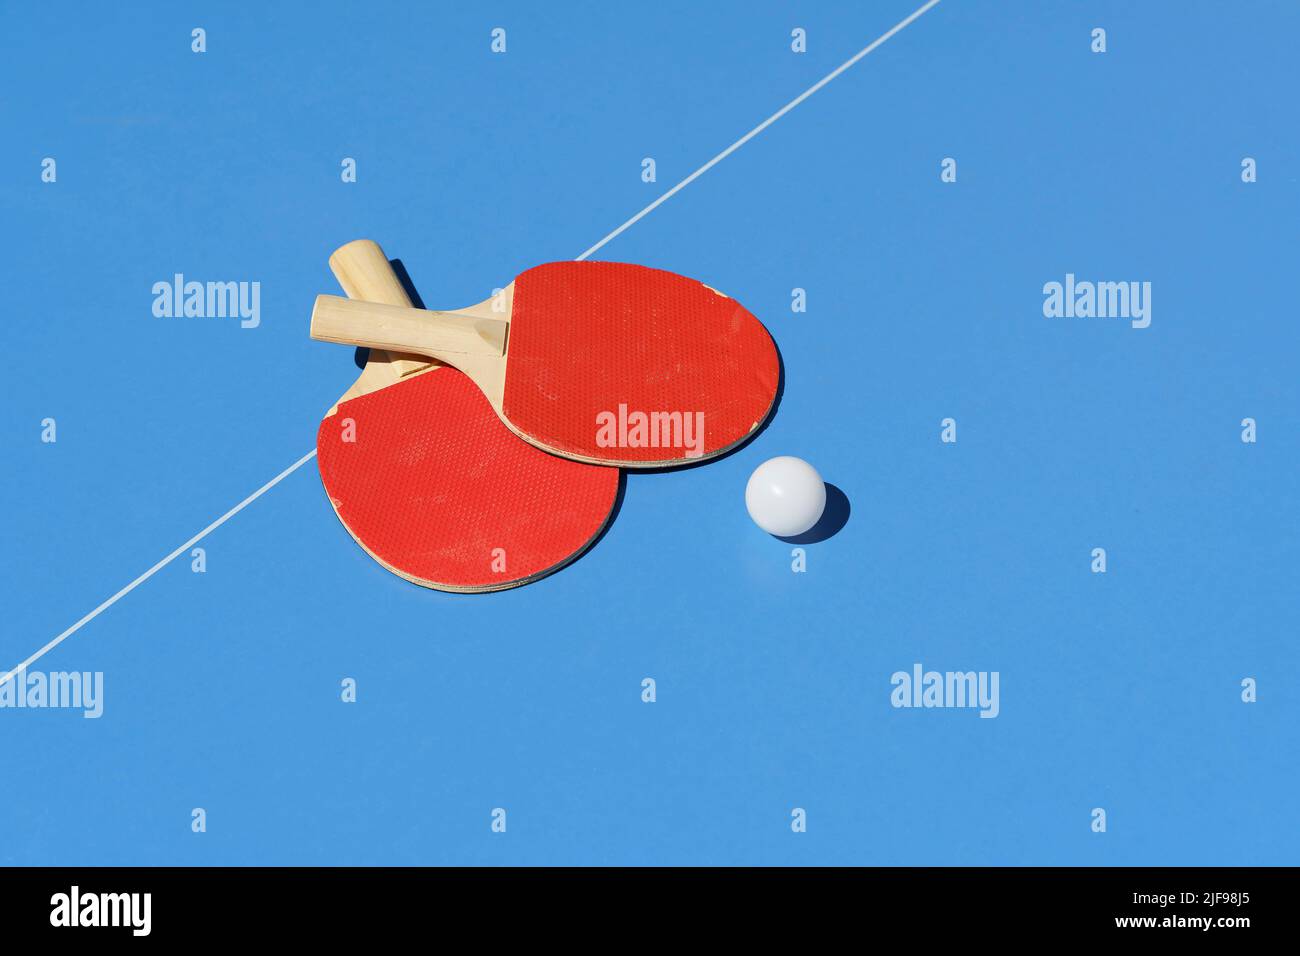 Ping pong tennis table background. Tennis rackets and a ball on a blue sports table. High quality photo Stock Photo